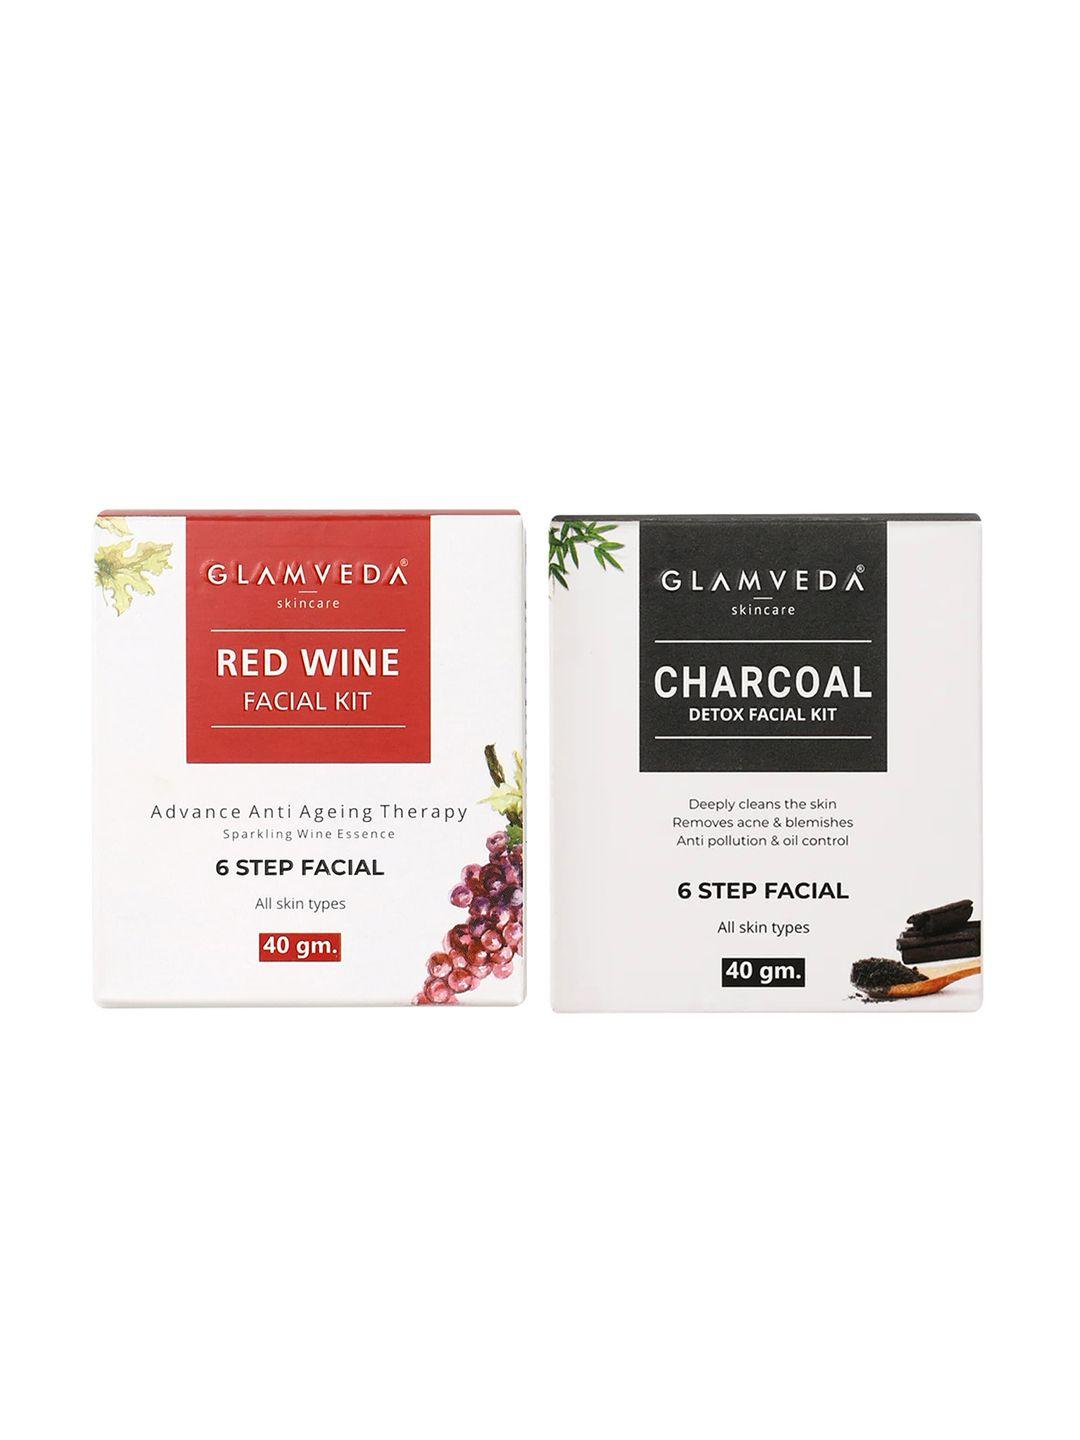 glamveda set of 2 red wine advance anti ageing & charcoal detox facial kit 40gm each